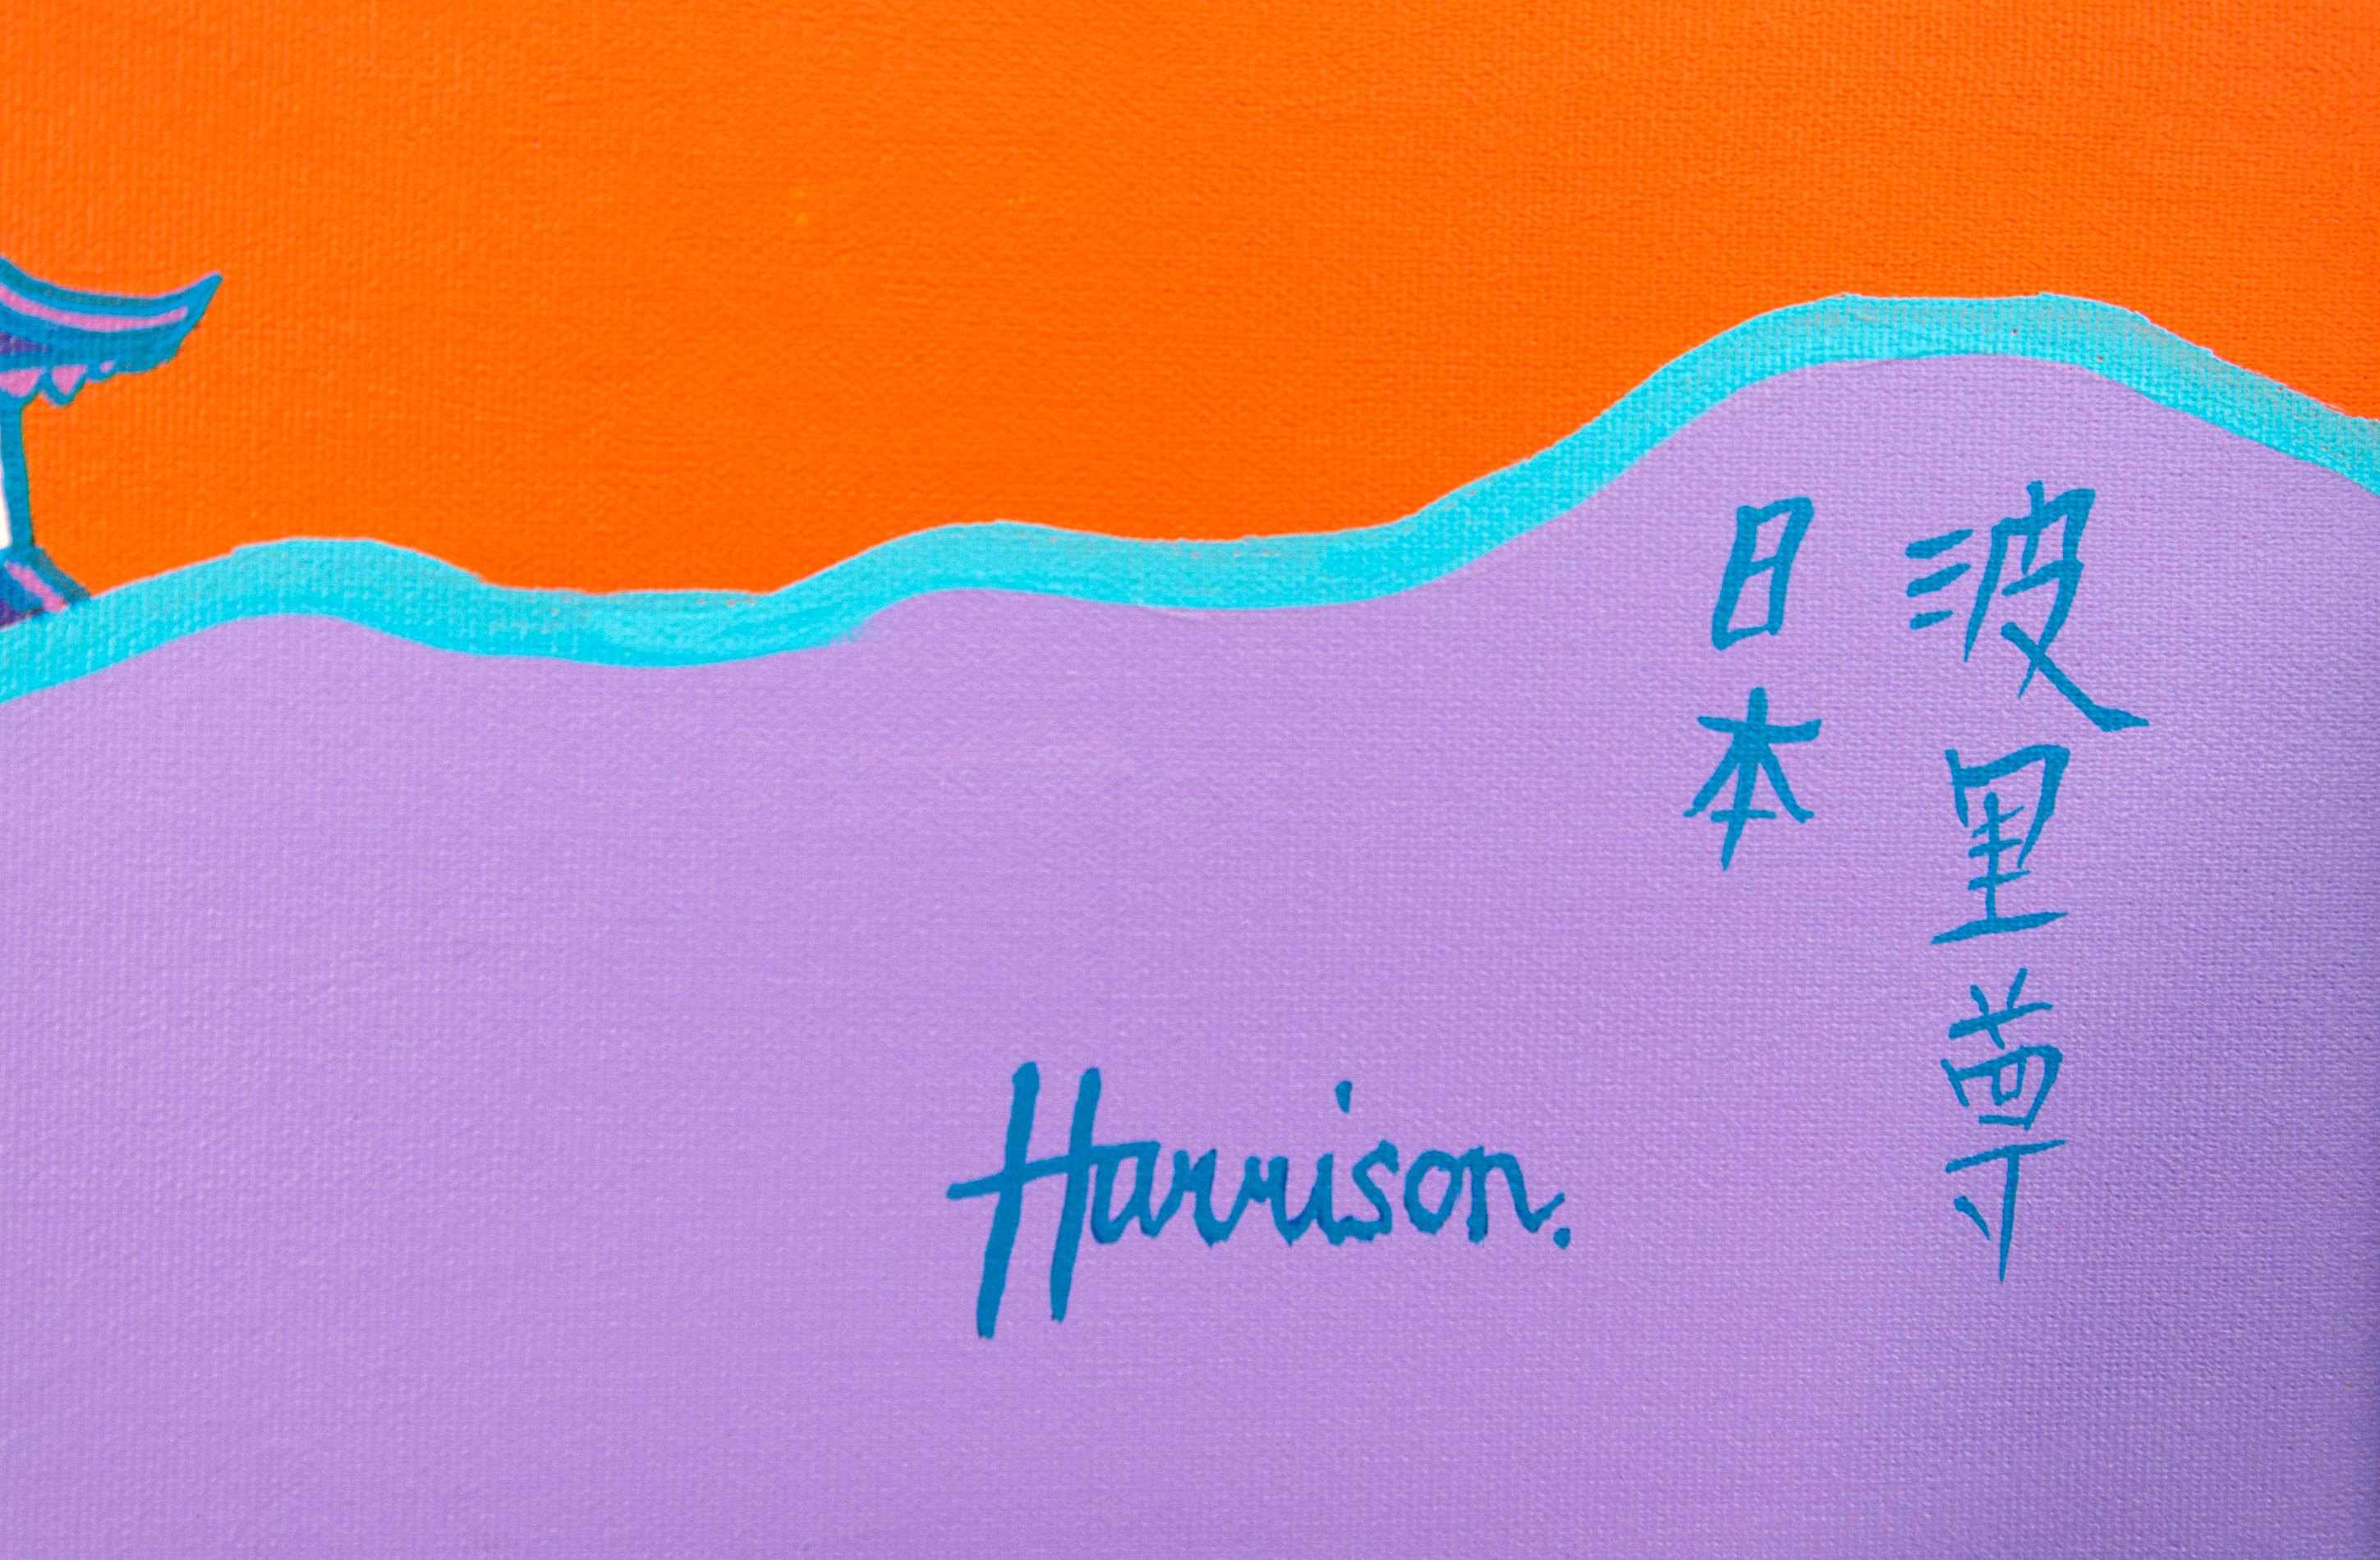 He loved to paint people and places. Ted Harrison became one of Canada’s most popular artists known for his brightly coloured paintings that depicted the world around him. This modern landscape of a mountain, a classic Japanese pagoda, a gate, a